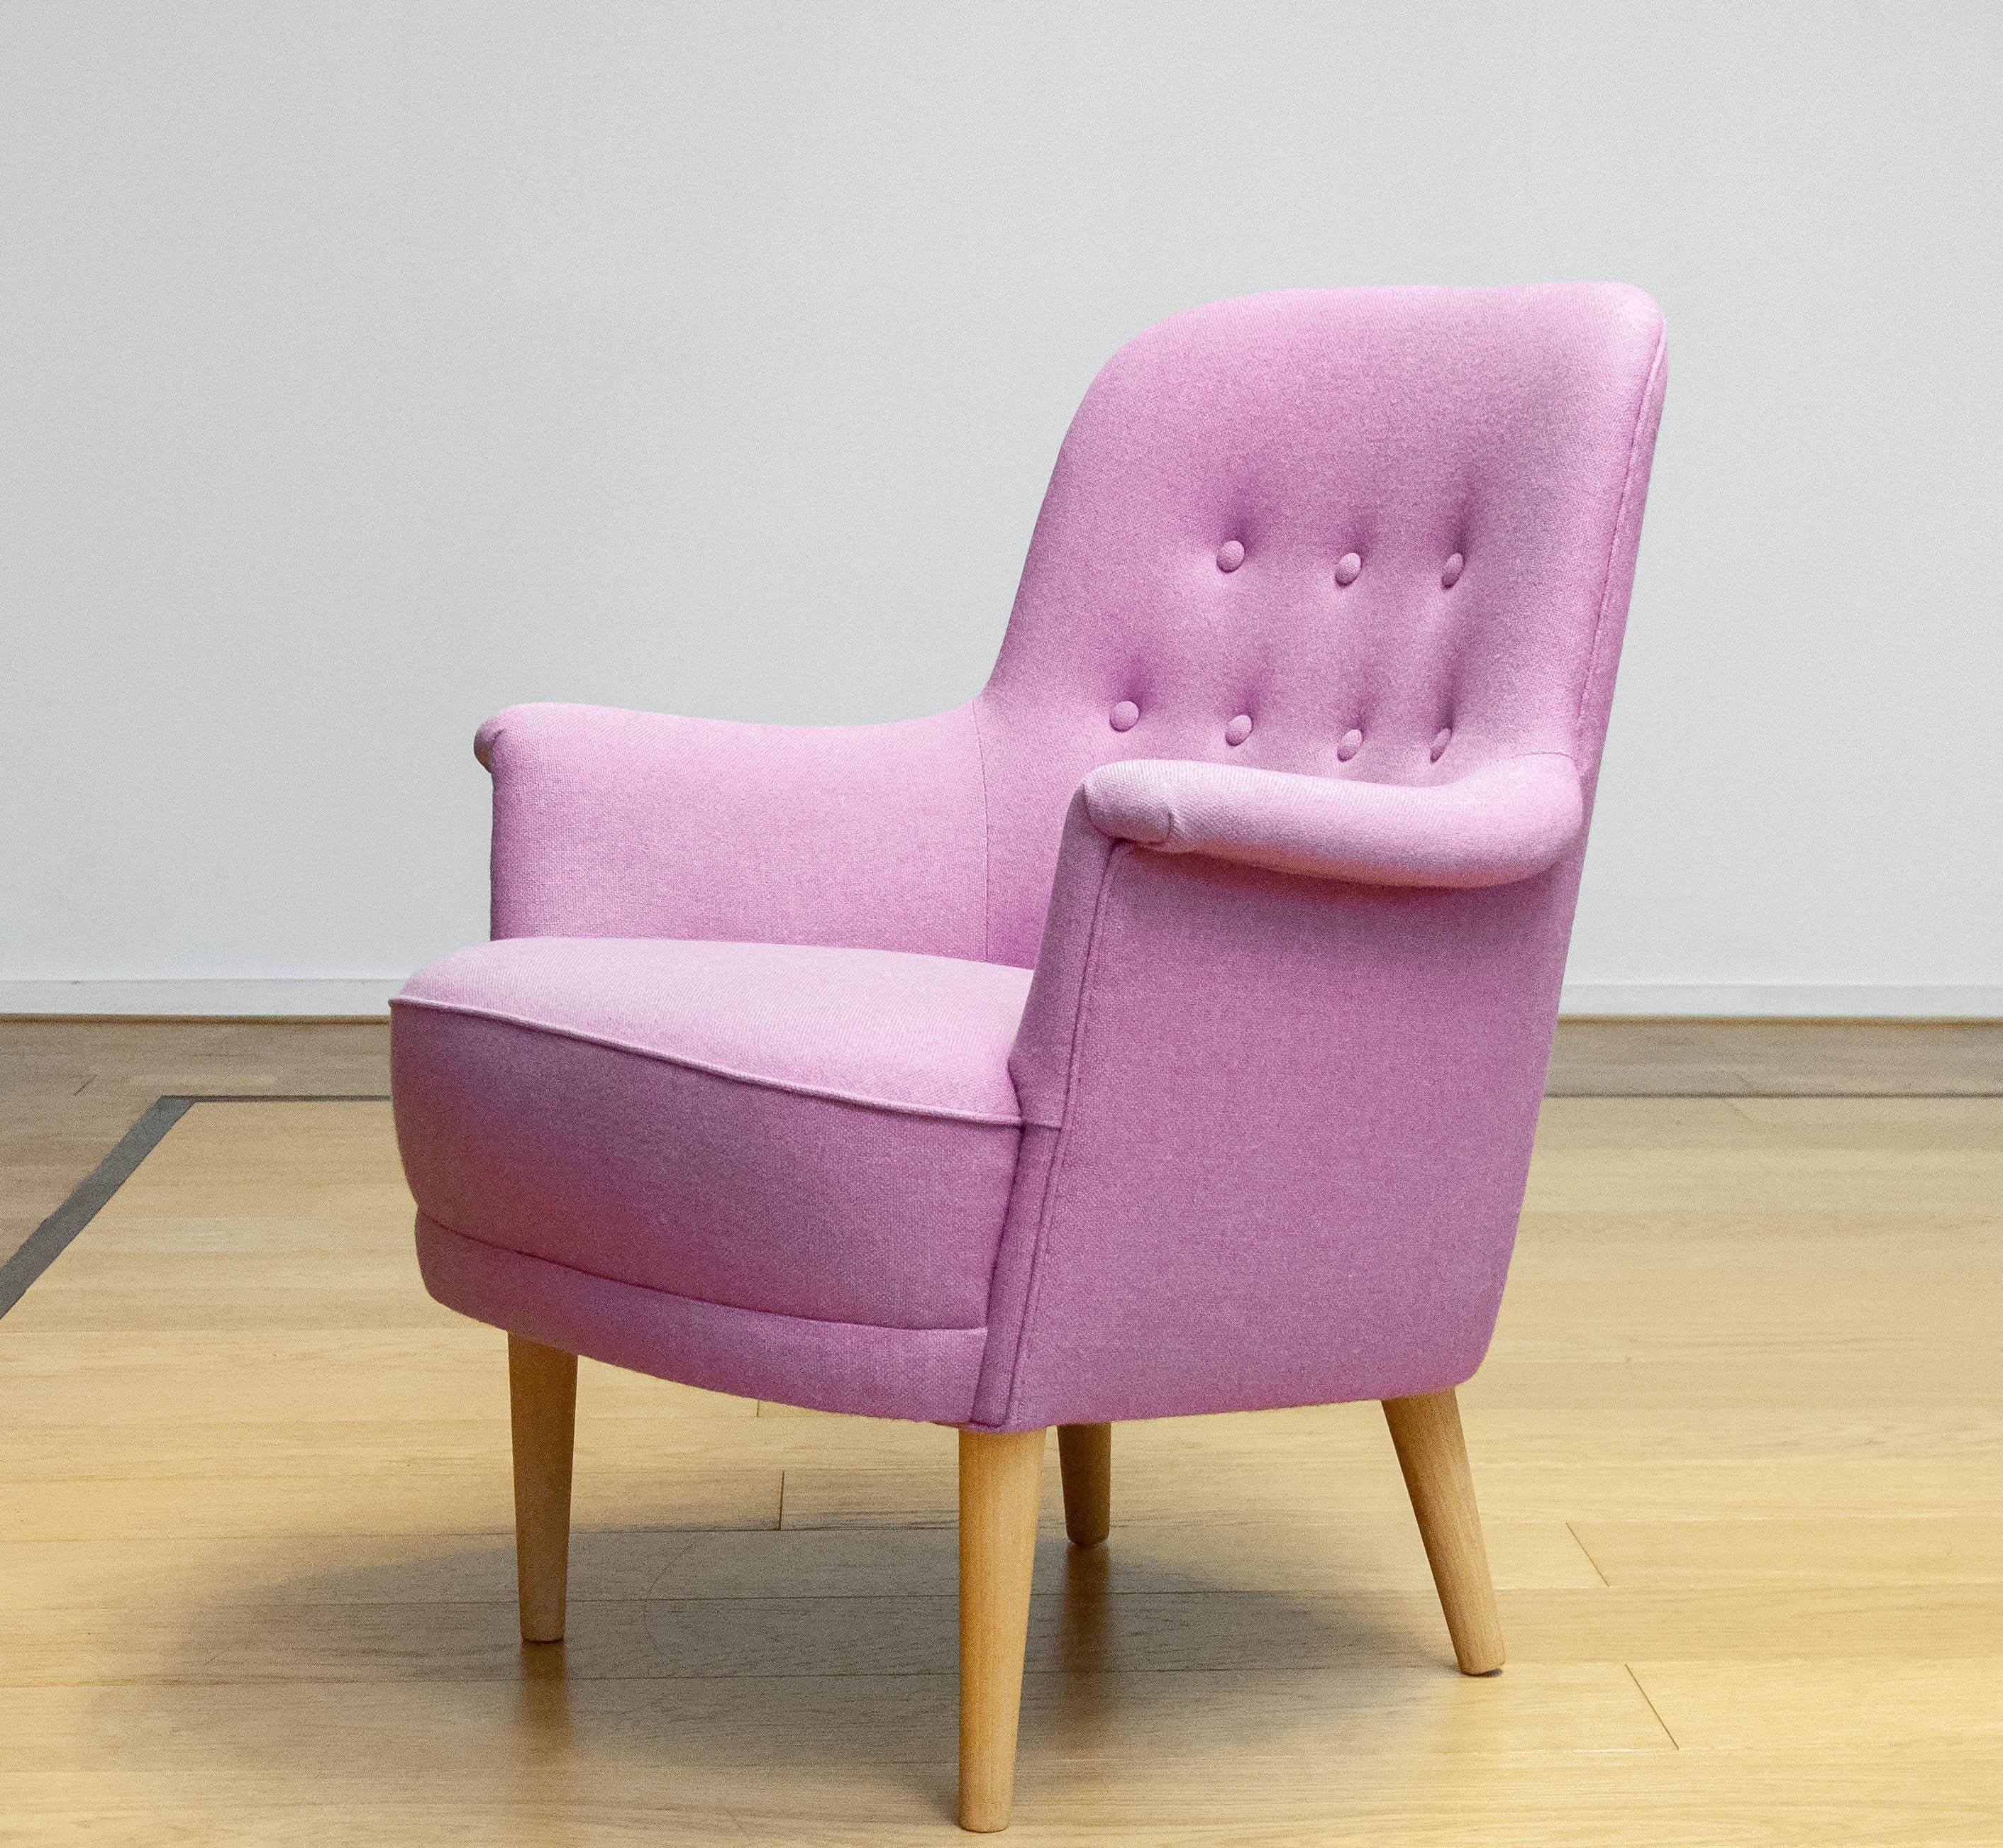 1950s Upholstered With Lilac Wool Armchair By Carl Malmsten For O.H. Sjogren. In Good Condition For Sale In Silvolde, Gelderland